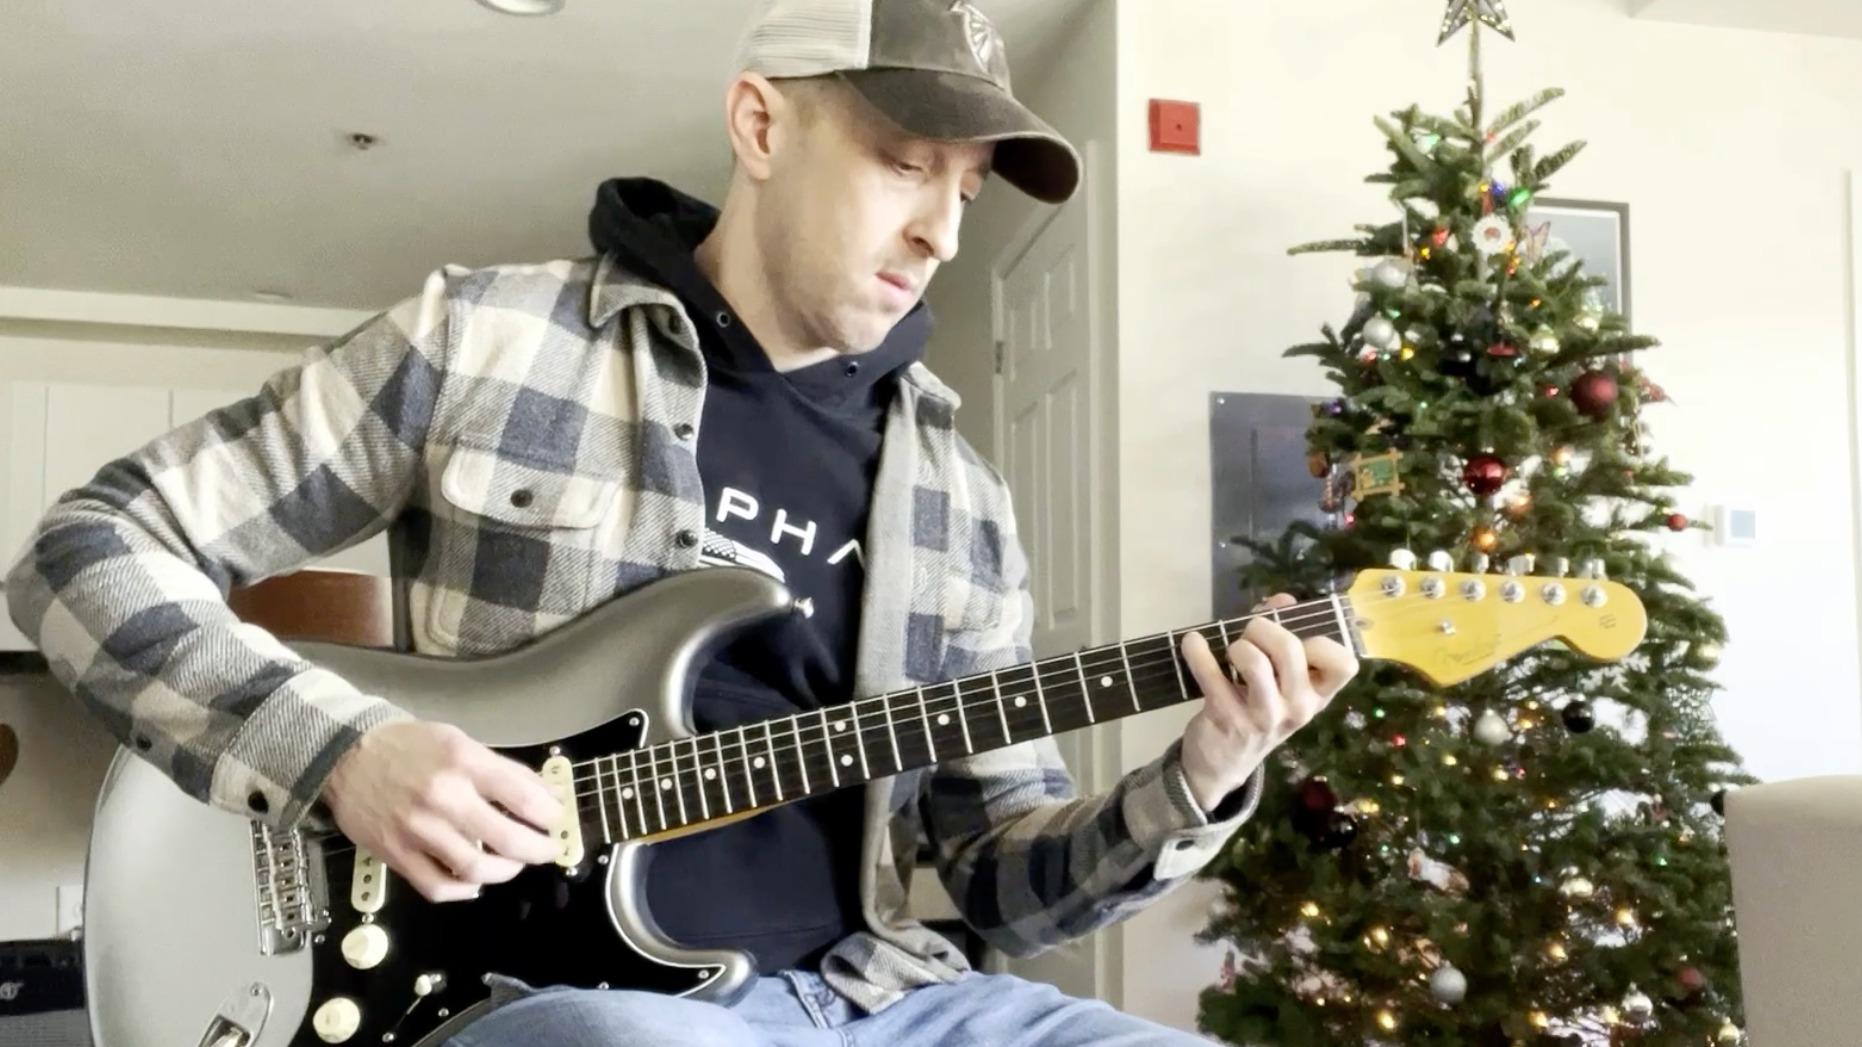 Have Yourself a Merry Little Christmas - Chord Melody